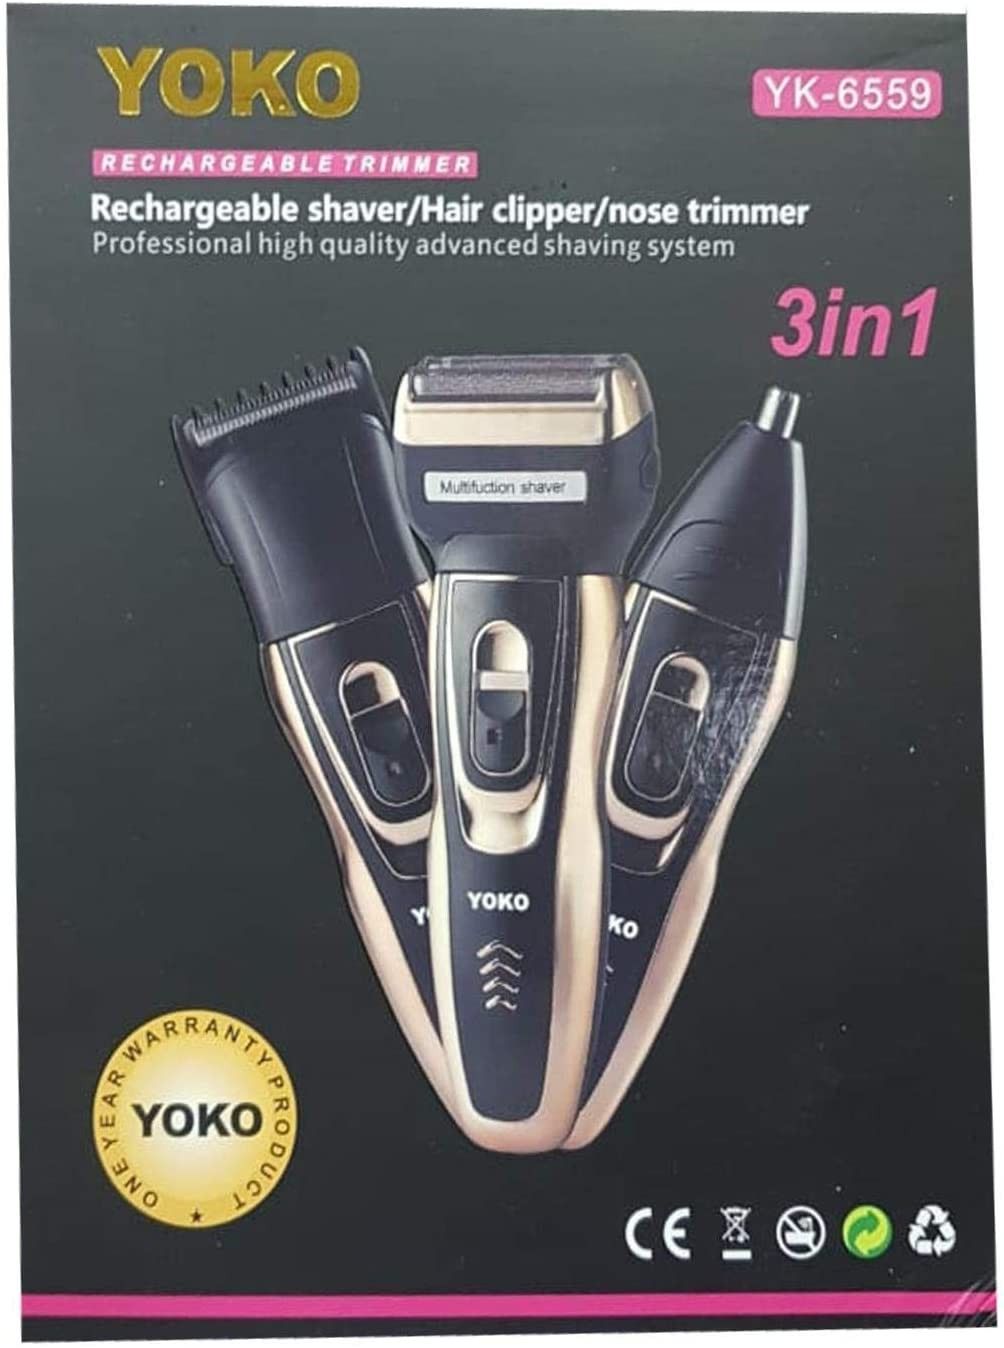 Yoko Hair Clipper+Smoother+Nose Trimmer Professional Home Barber Set - Black, Gold